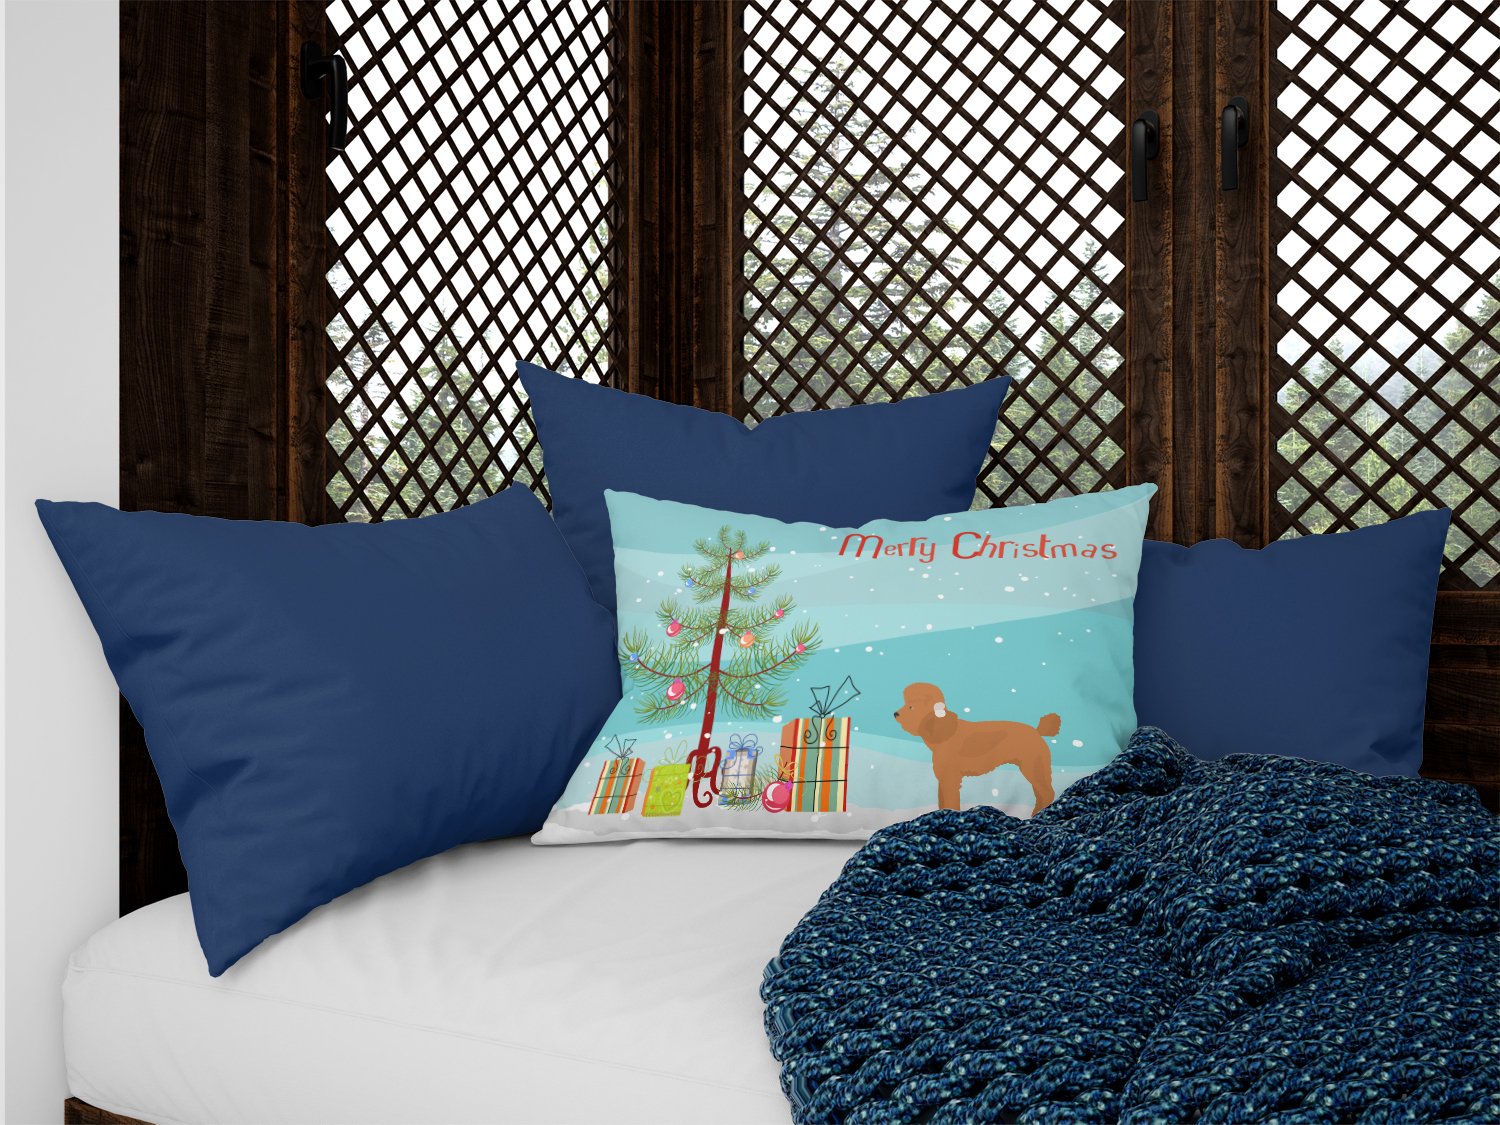 Toy Poodle Christmas Tree Canvas Fabric Decorative Pillow CK3479PW1216 by Caroline's Treasures